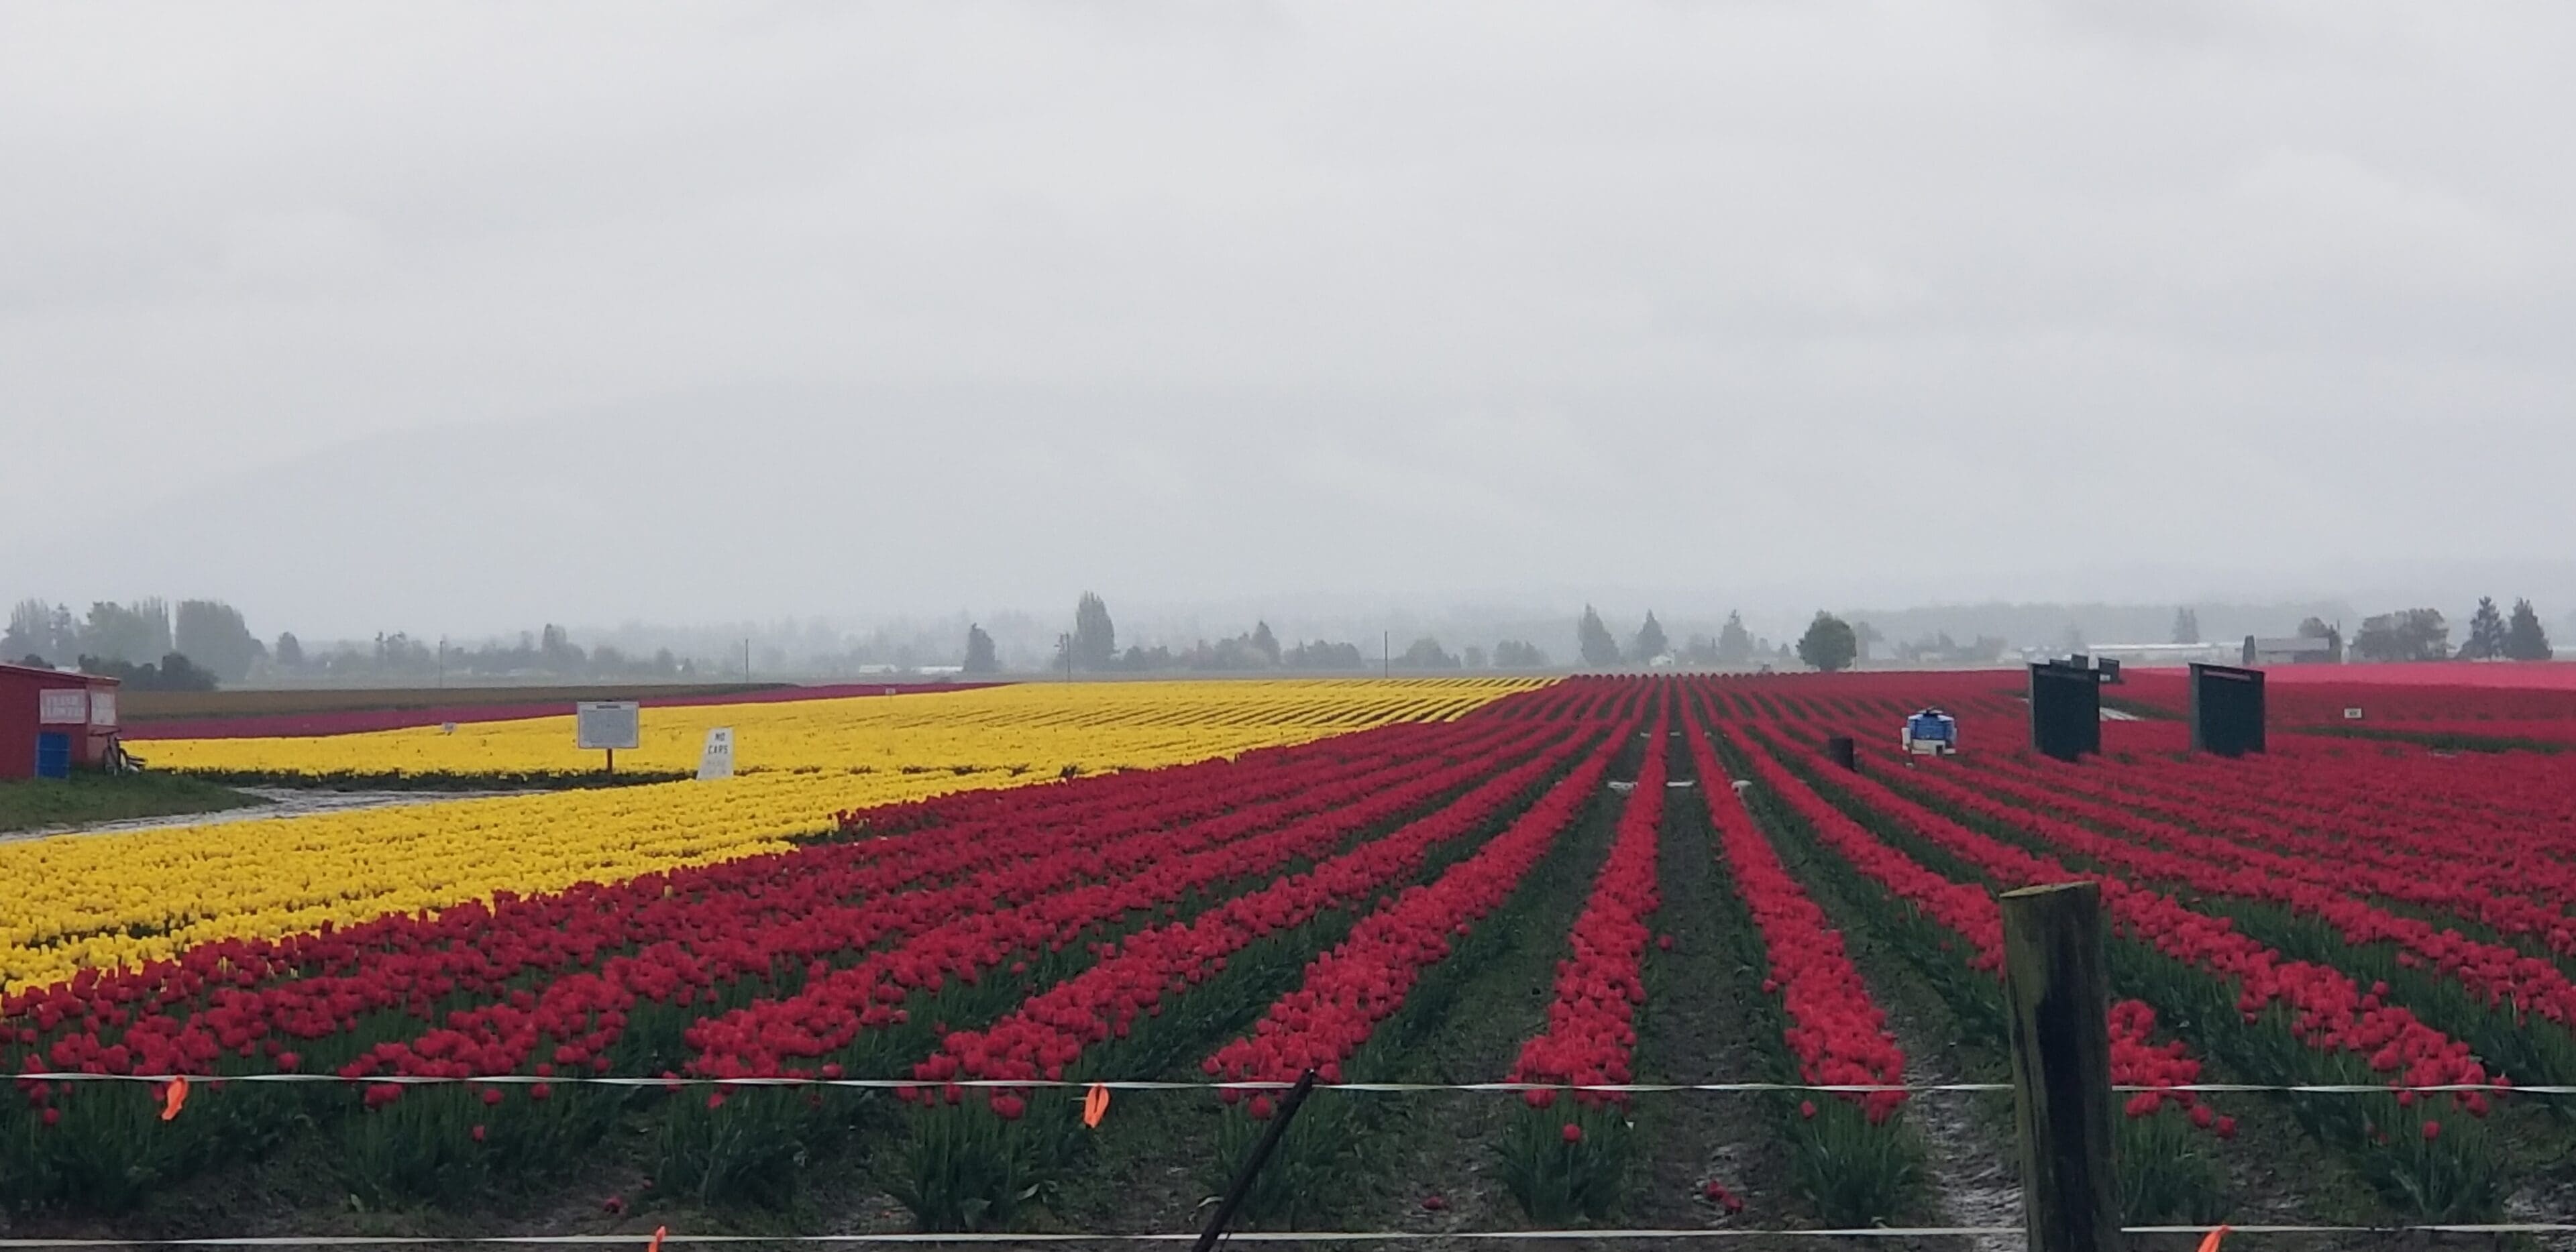 A field of flowers with red and yellow tulips.